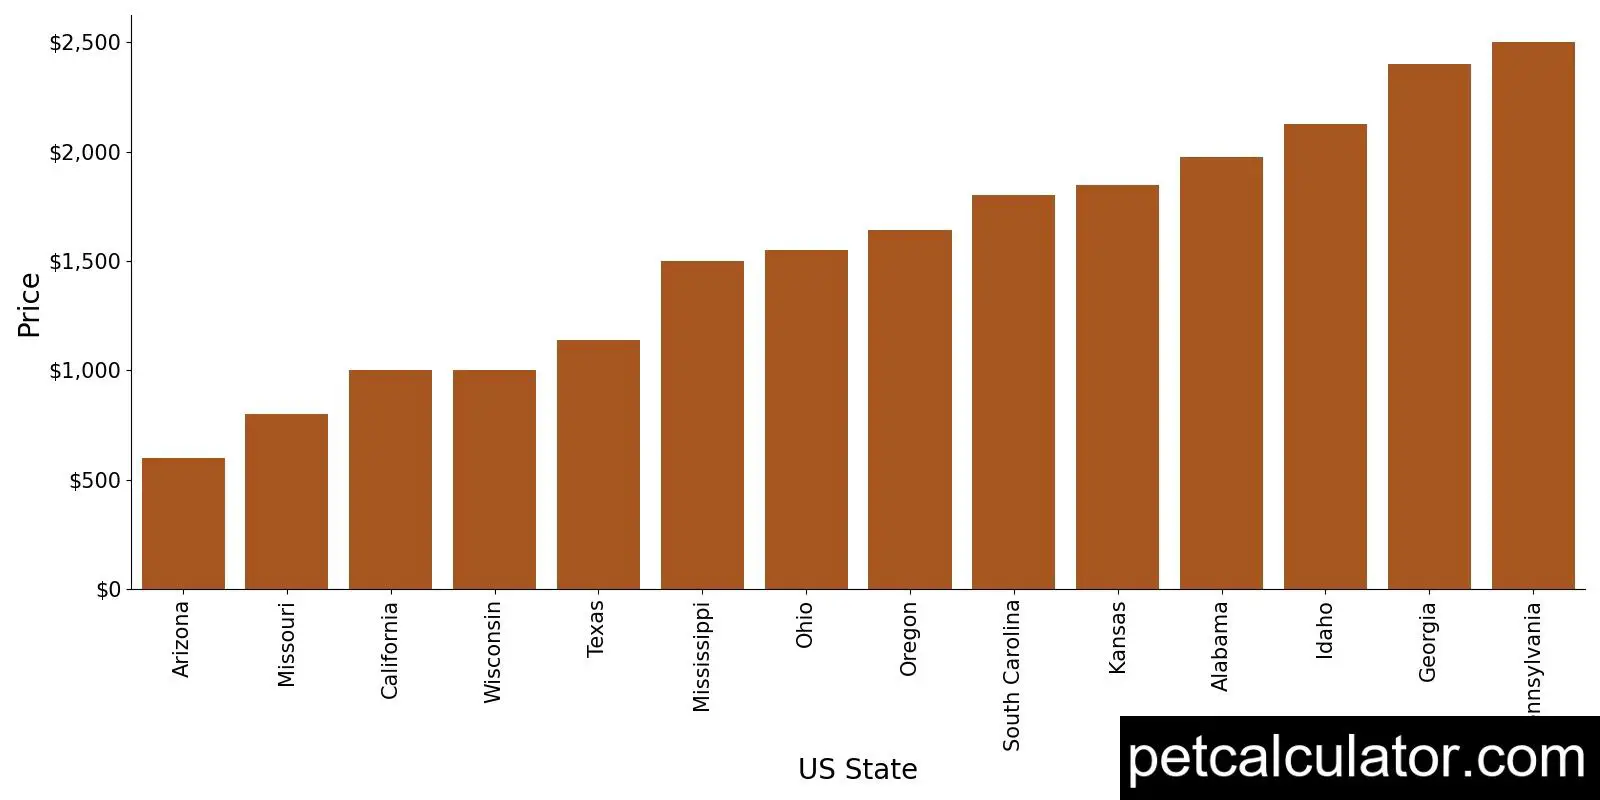 Price of Standard Schnauzer by US State 